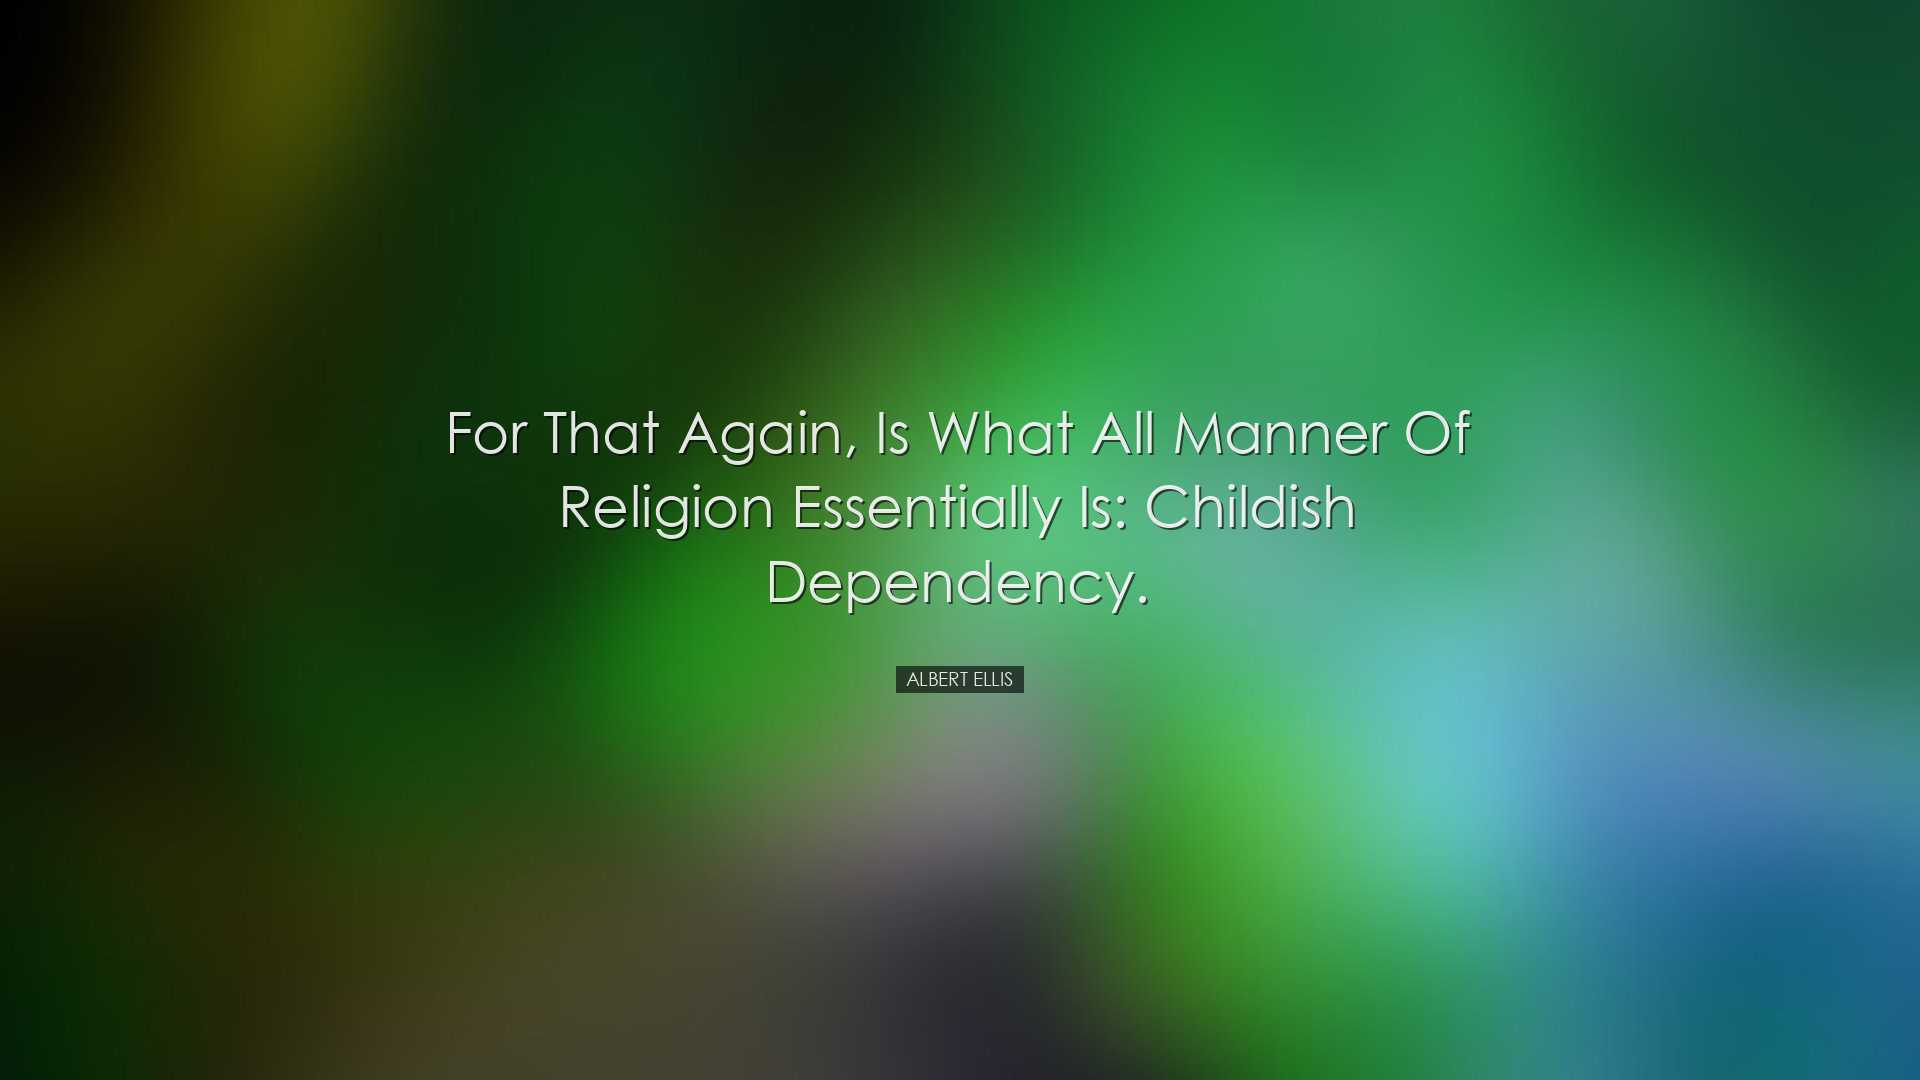 For that again, is what all manner of religion essentially is: chi